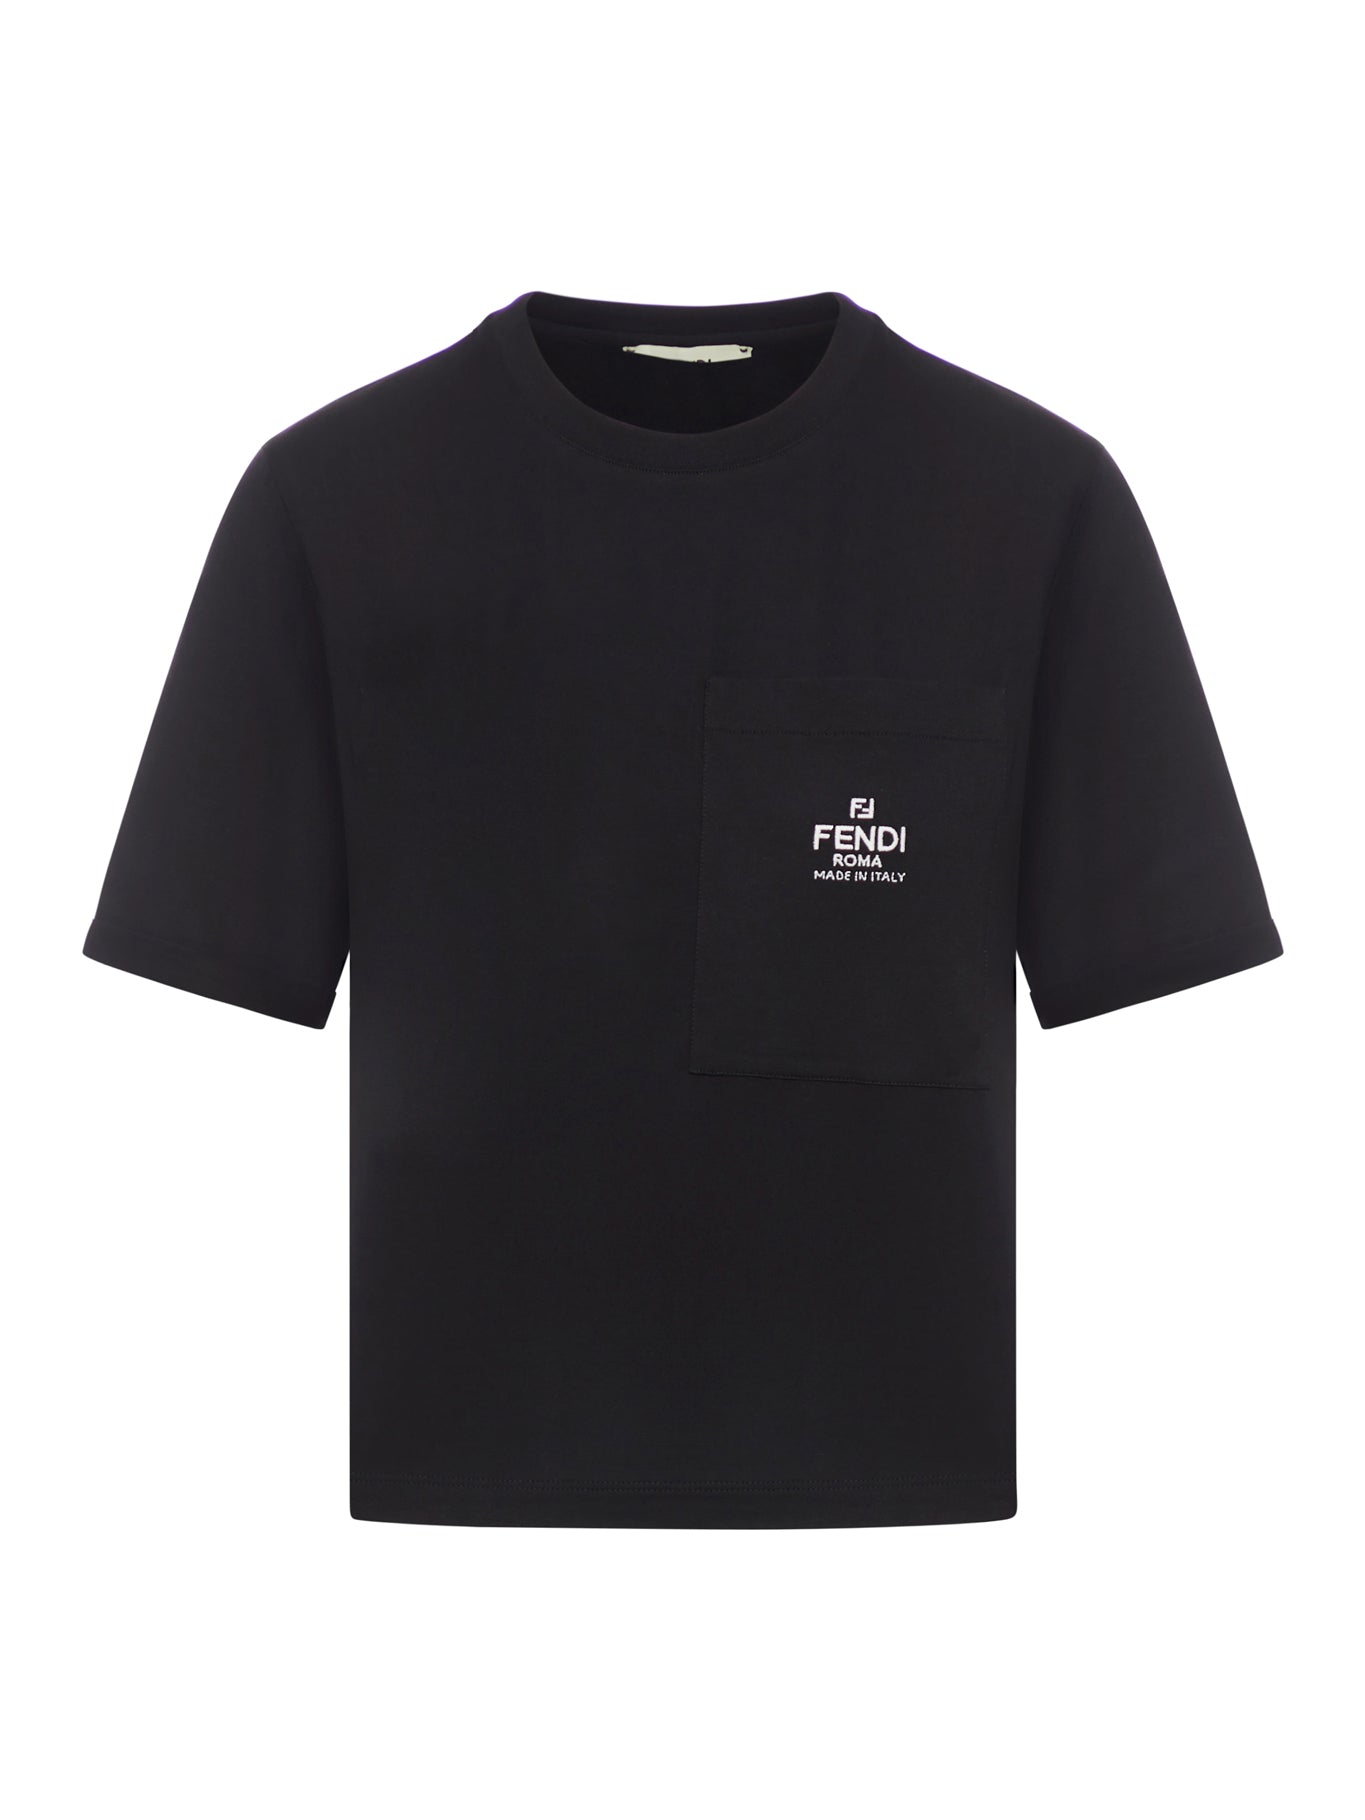 crew neck t-shirt with logo